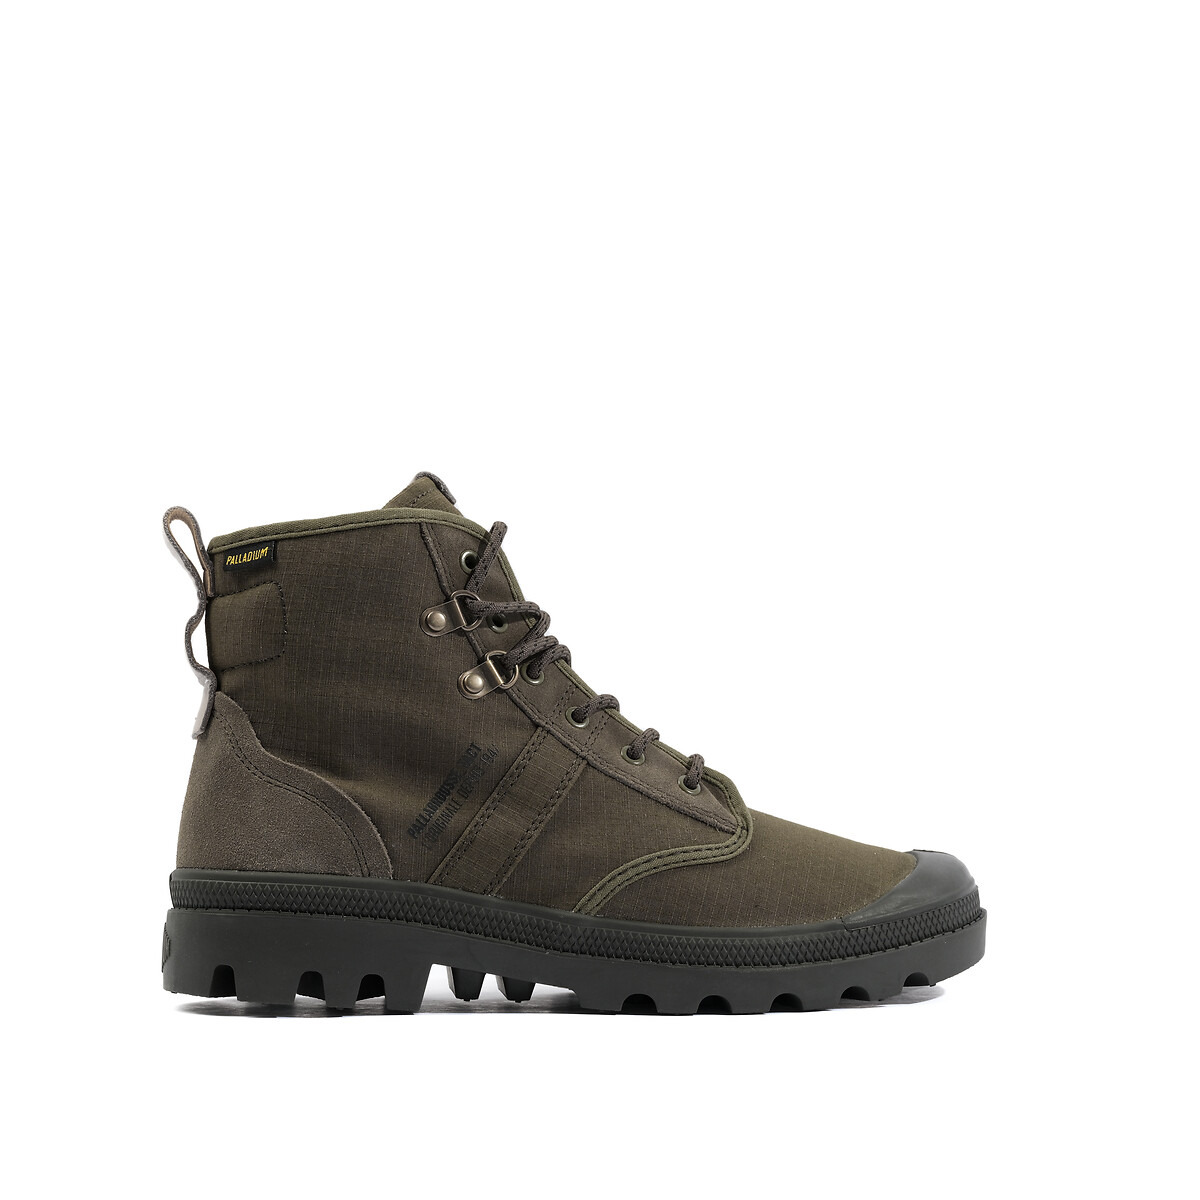 Pallabrousse Tact Boots in Canvas/Suede